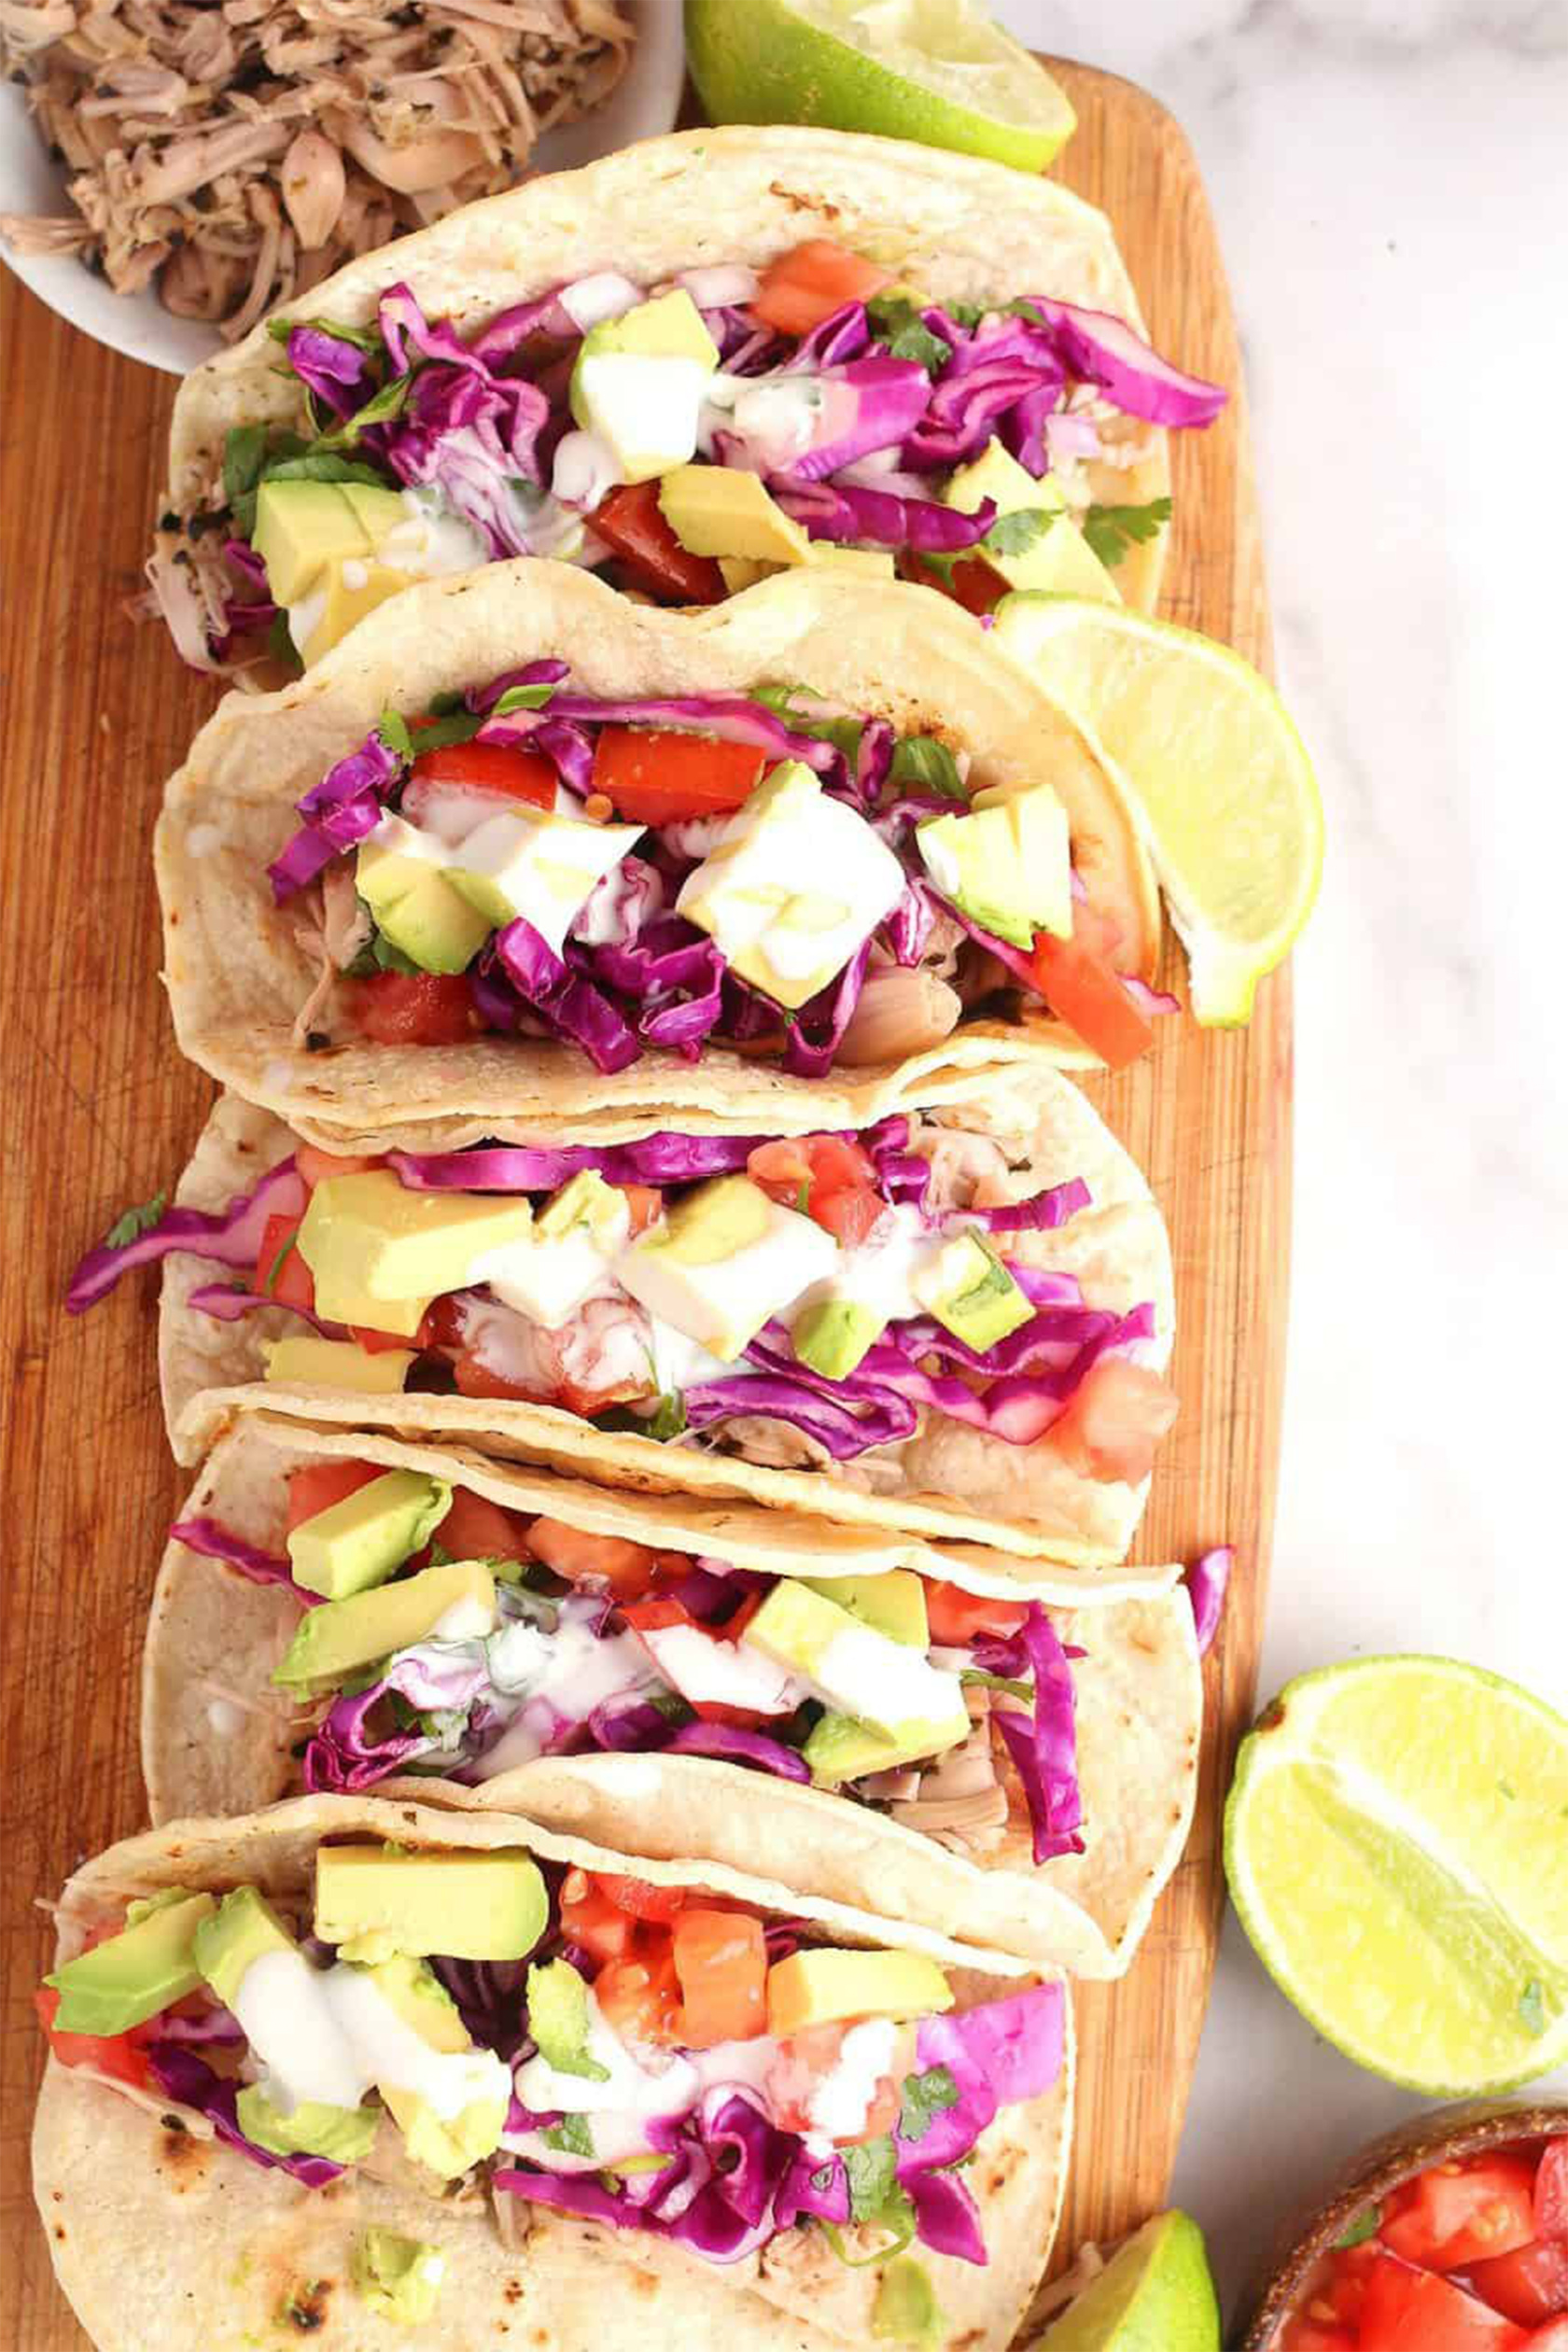 Vegan Tacos: 20 Recipes You Need to Try – Emilie Eats